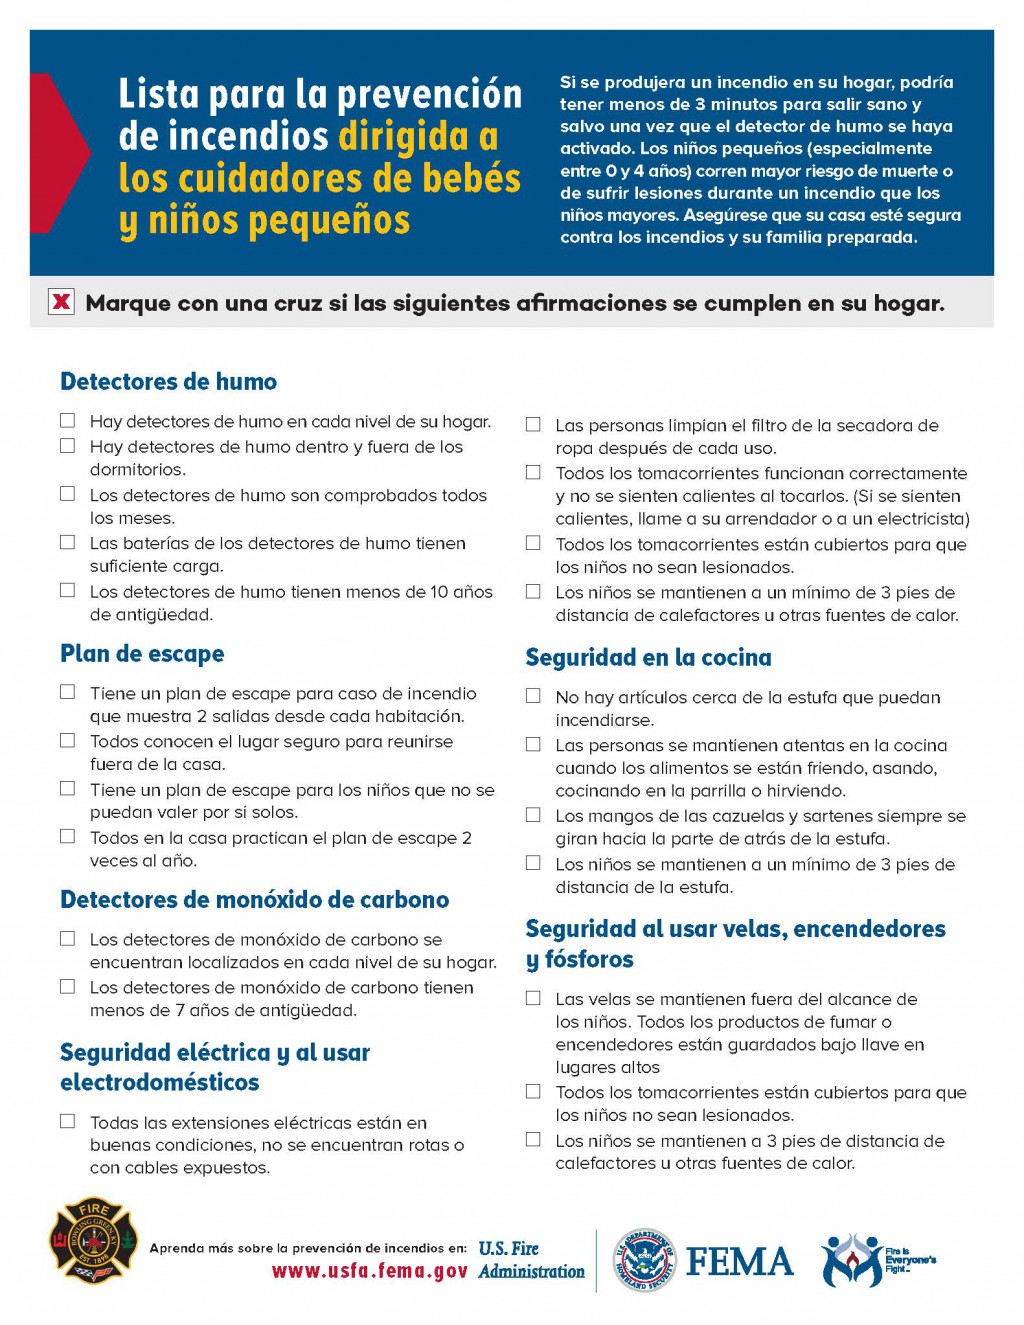 Fire Safety Checklist for caregivers of babies and toddlers Spanish